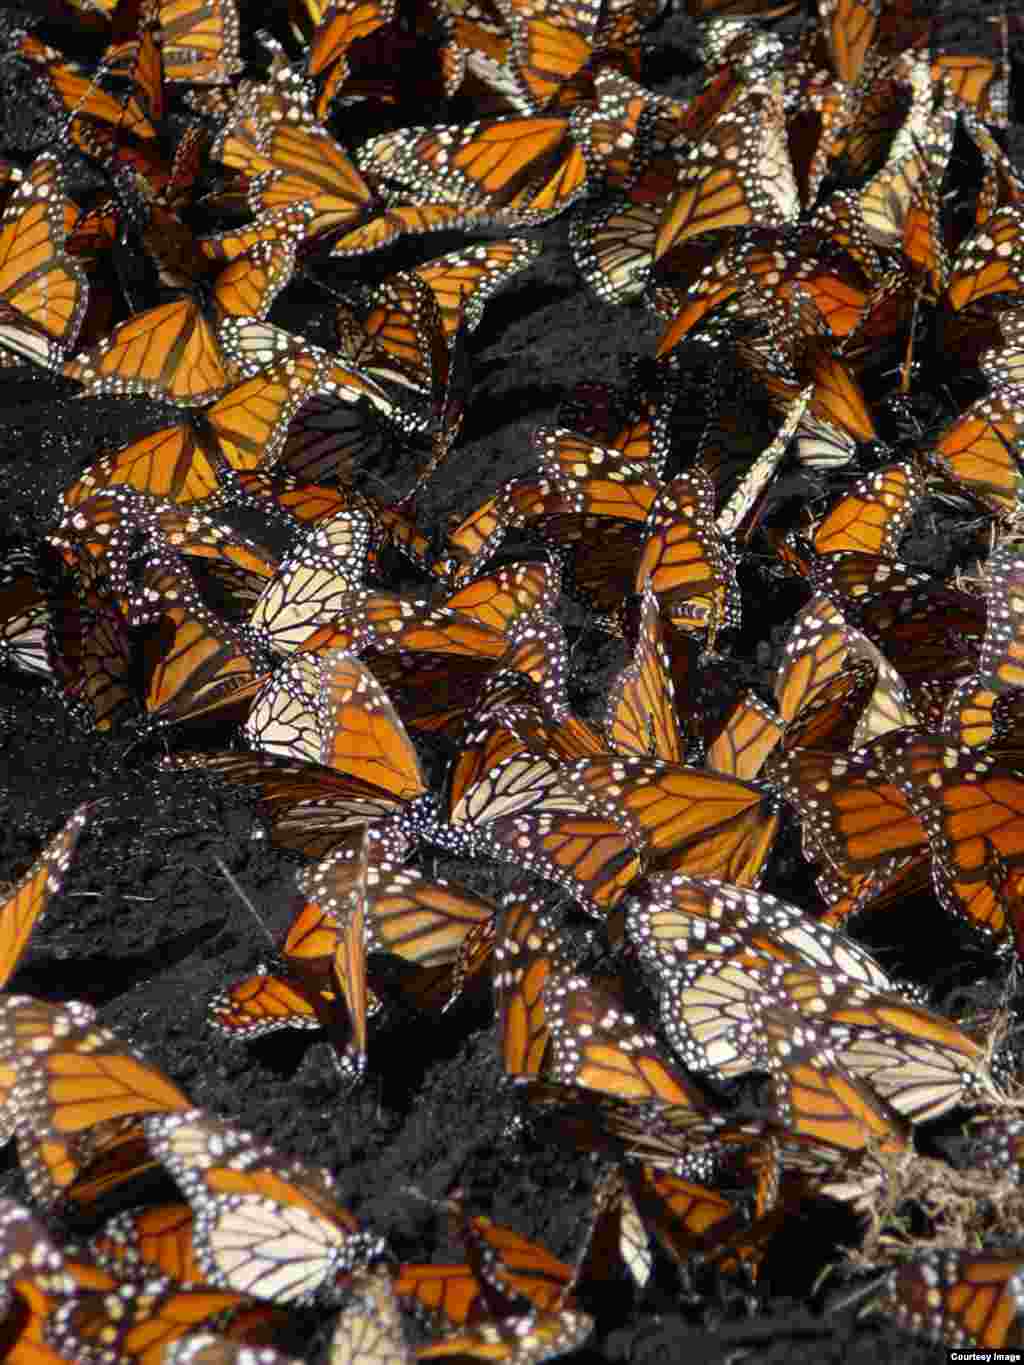 The population of migrating monarchs that reach Mexico each year has dropped dramatically in recent years because of habitat loss, decline in food source and changes in climate. (Credit: Natalie Tarpein)